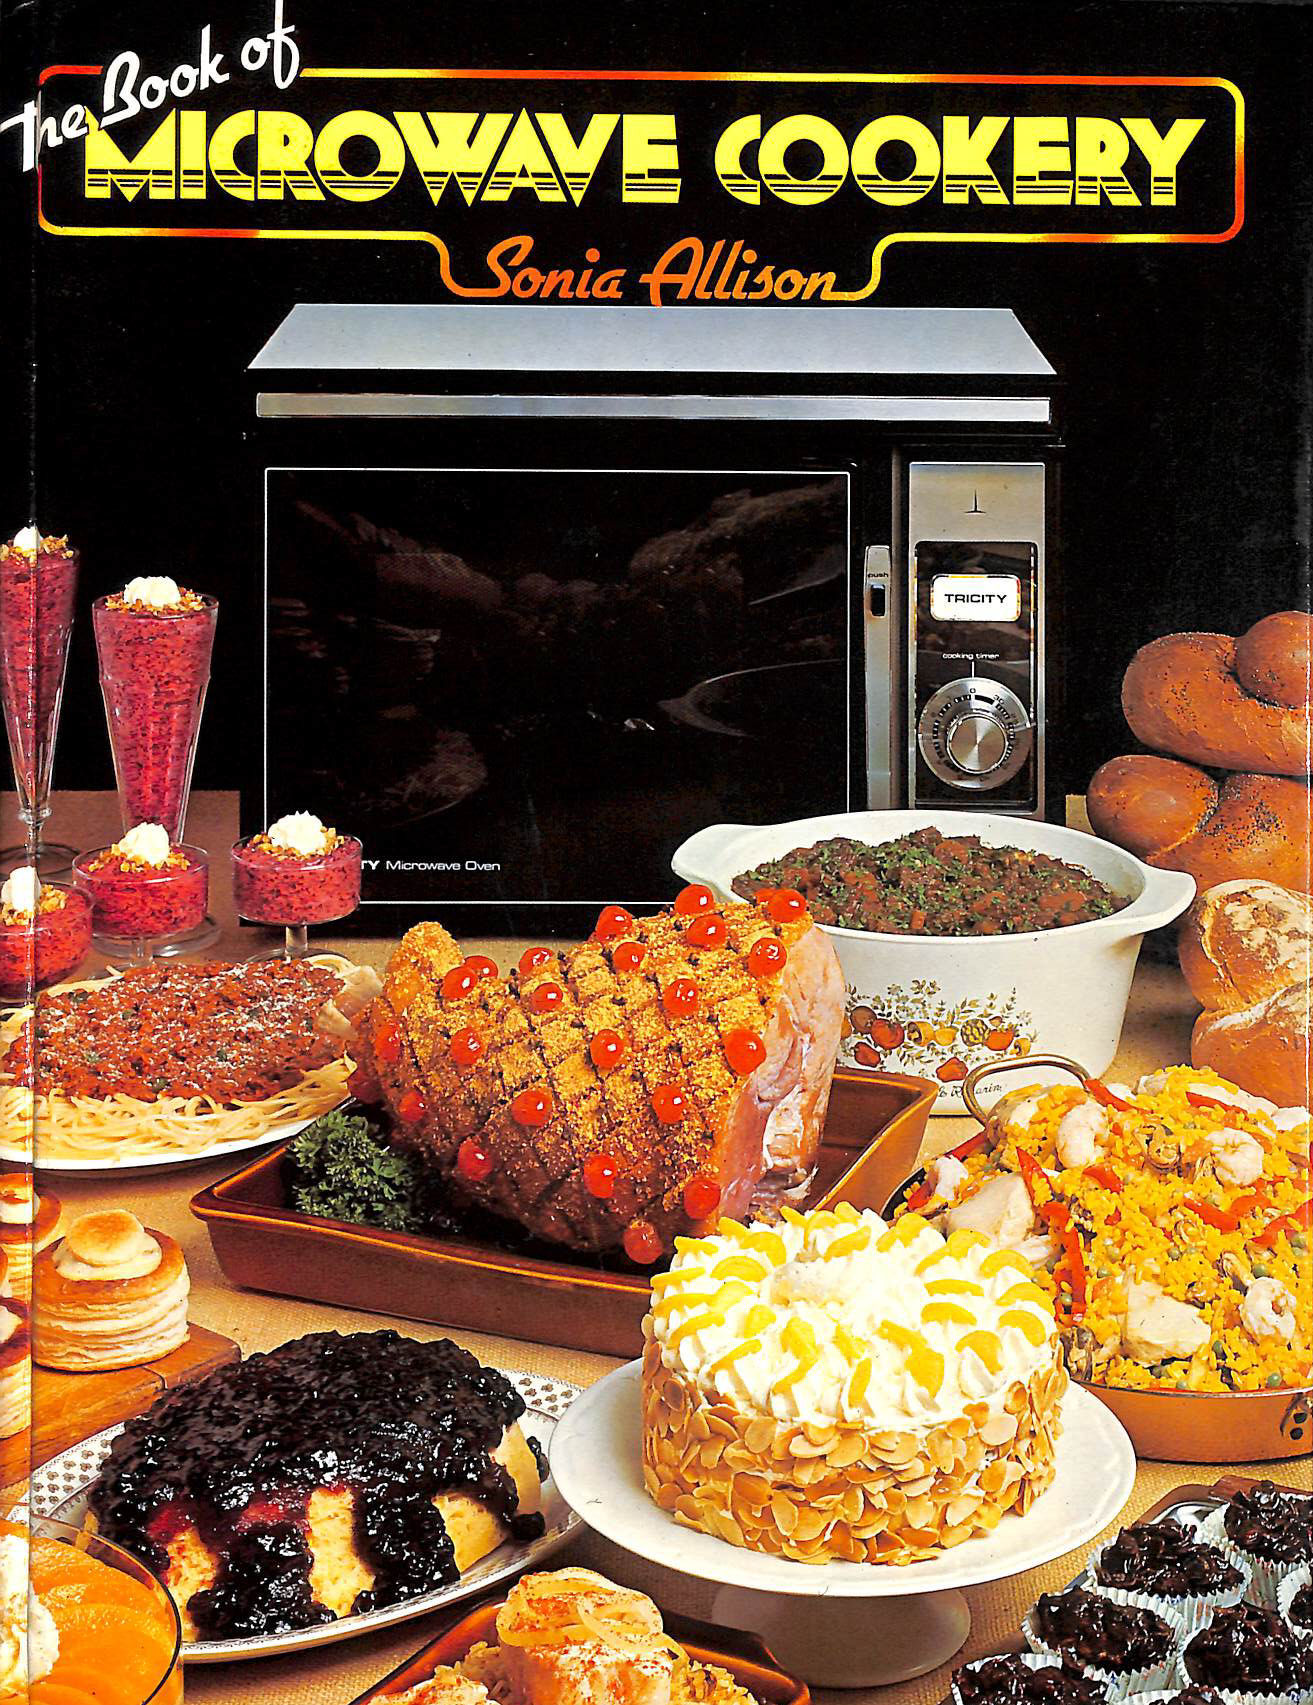 ALLISON, SONIA - Book of Microwave Cookery